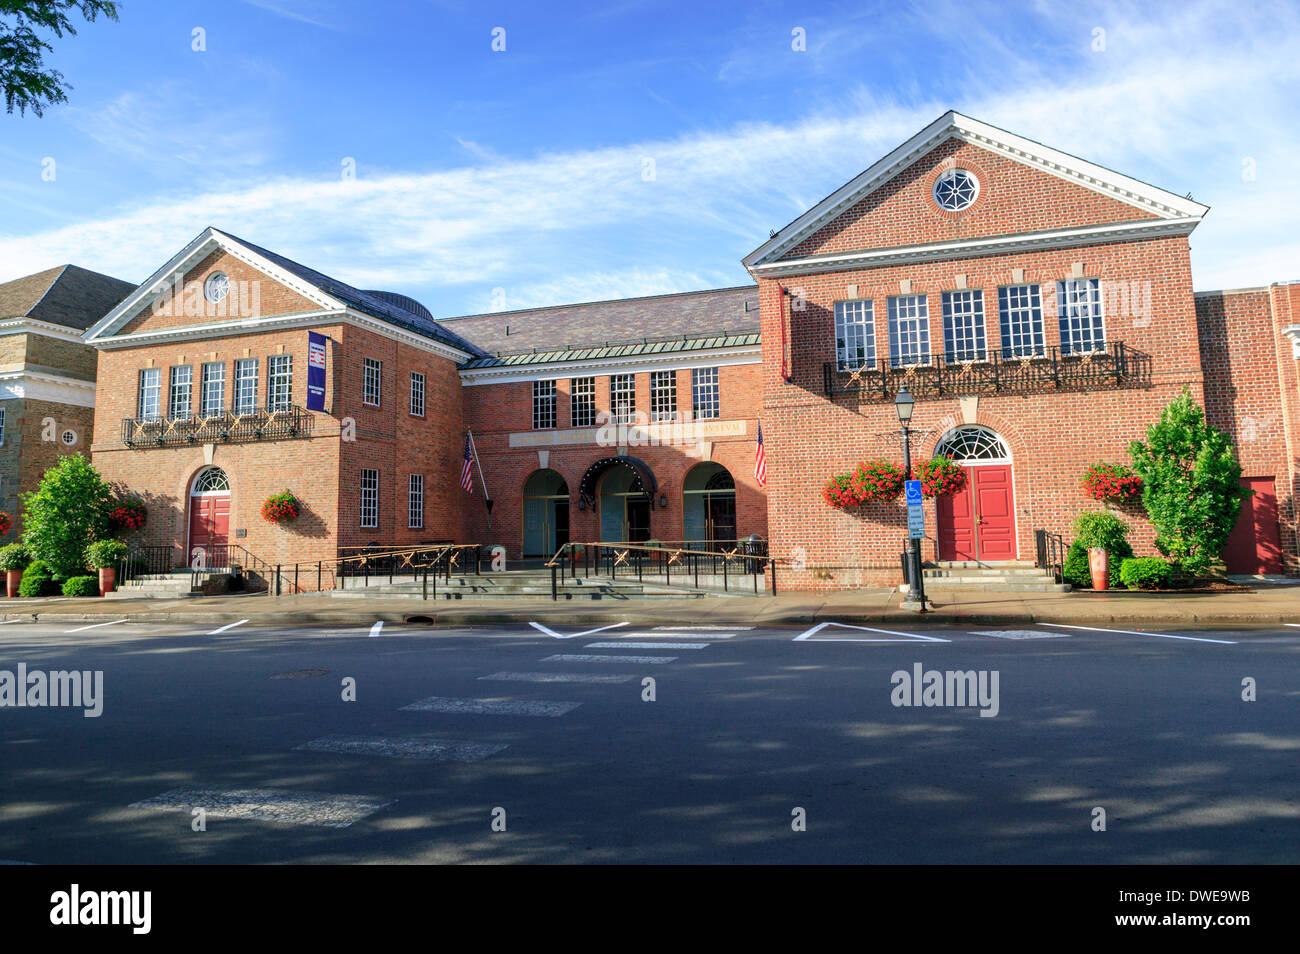 National Baseball Hall of Fame und Museum, Cooperstown, Otsego County, New York State, USA. Stockfoto